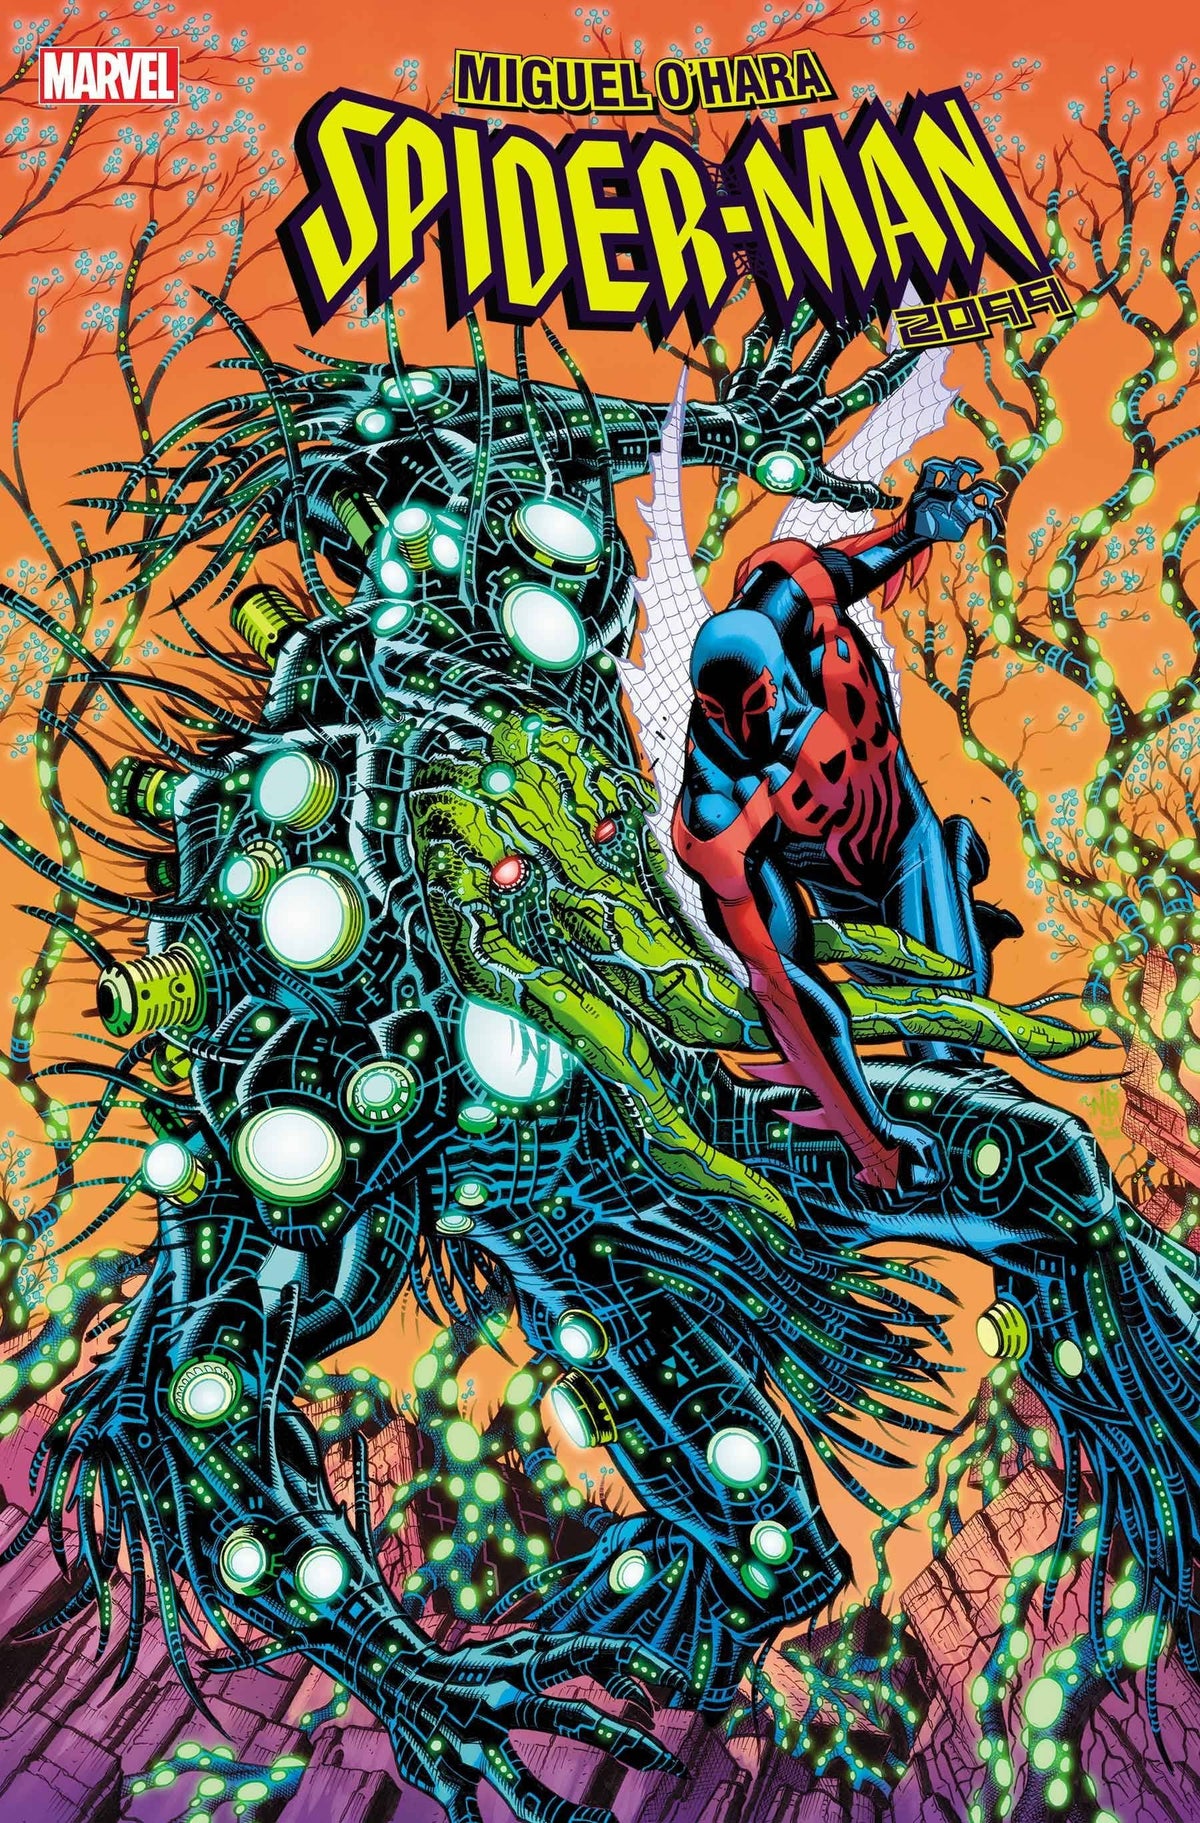 MIGUEL OHARA SPIDER-MAN 2099 #5IMAGE COVER